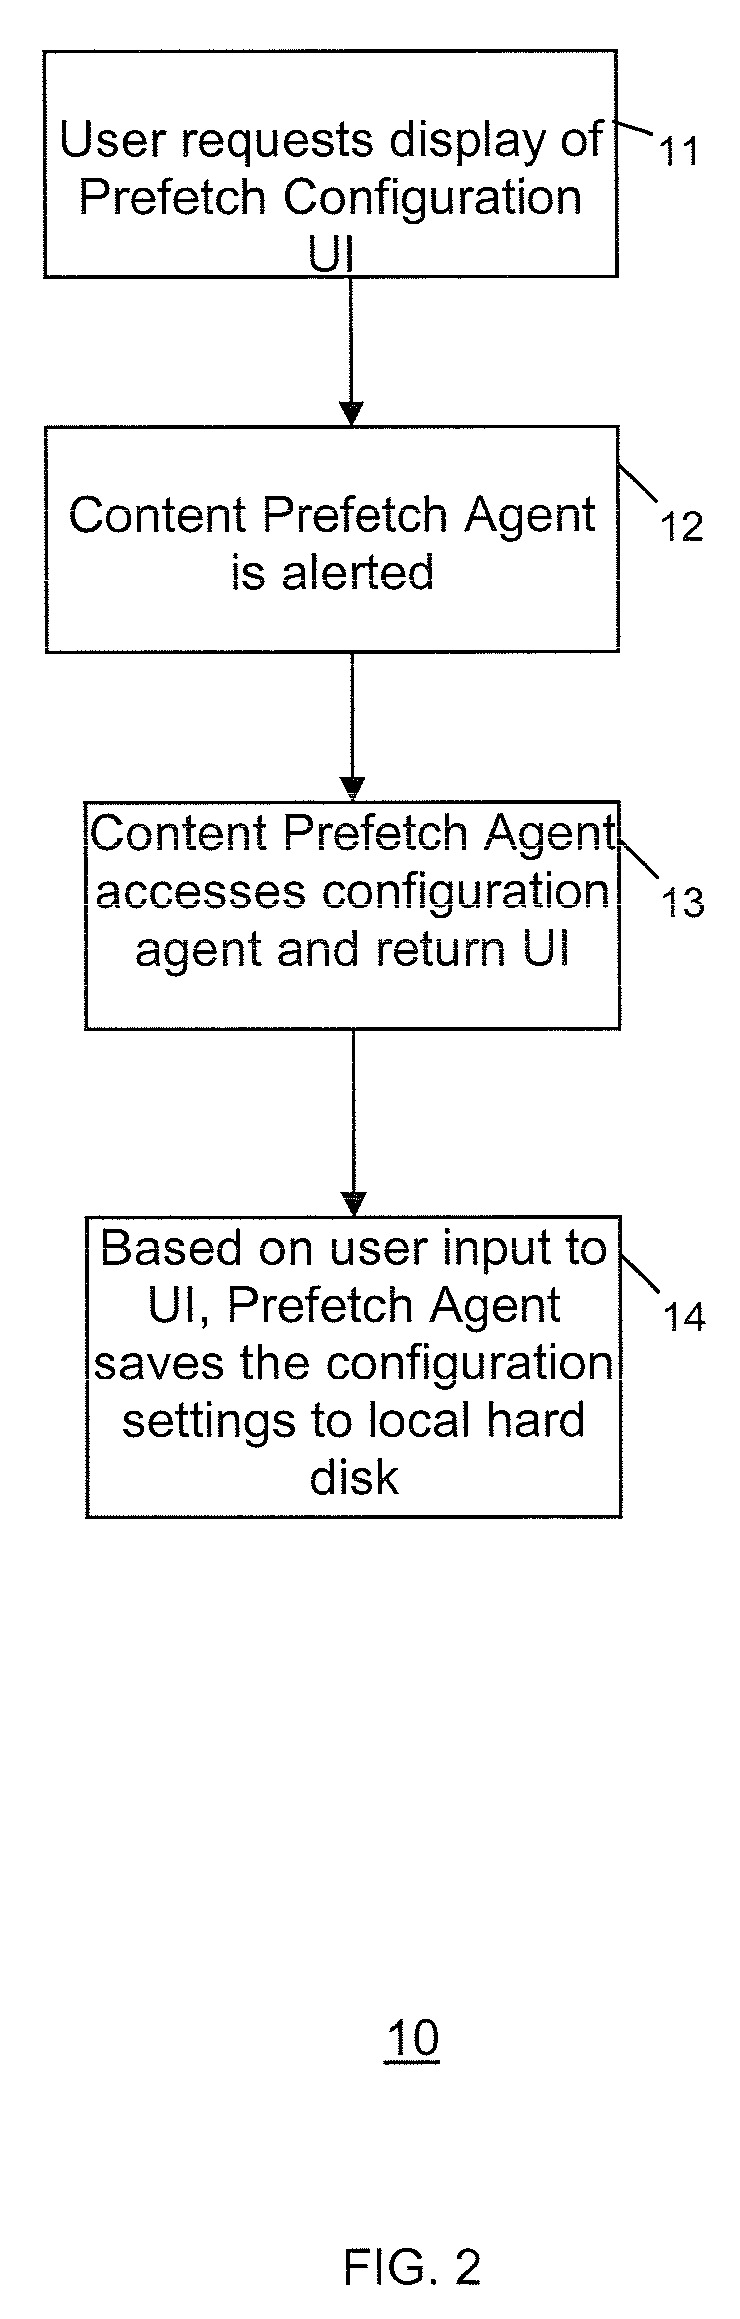 Method and system for prefetching internet content for video recorders